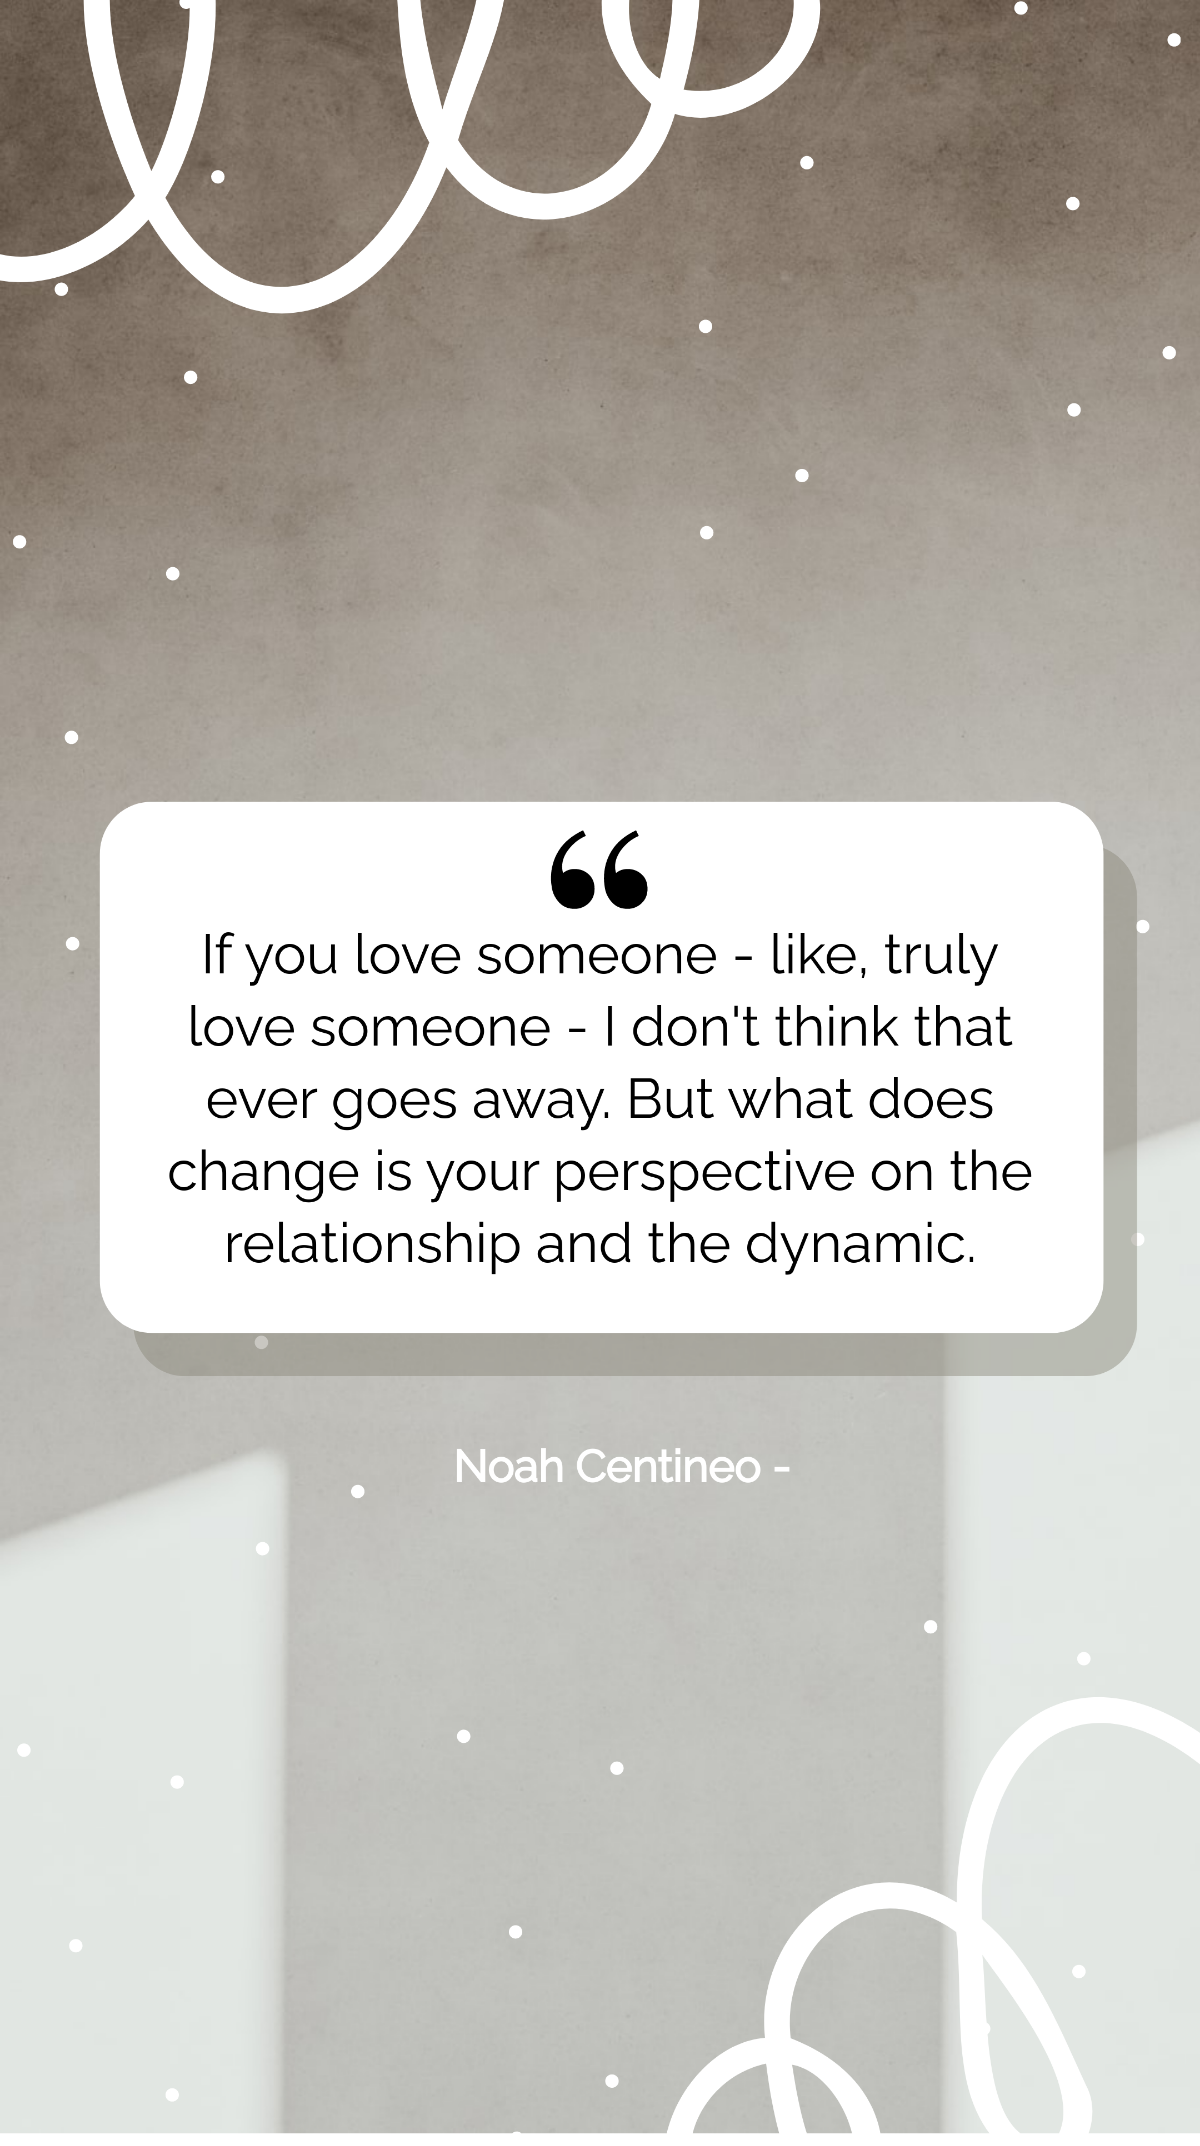 Noah Centineo - If you love someone - like, truly love someone - I don't think that ever goes away. But what does change is your perspective on the relationship and the dynamic. Template